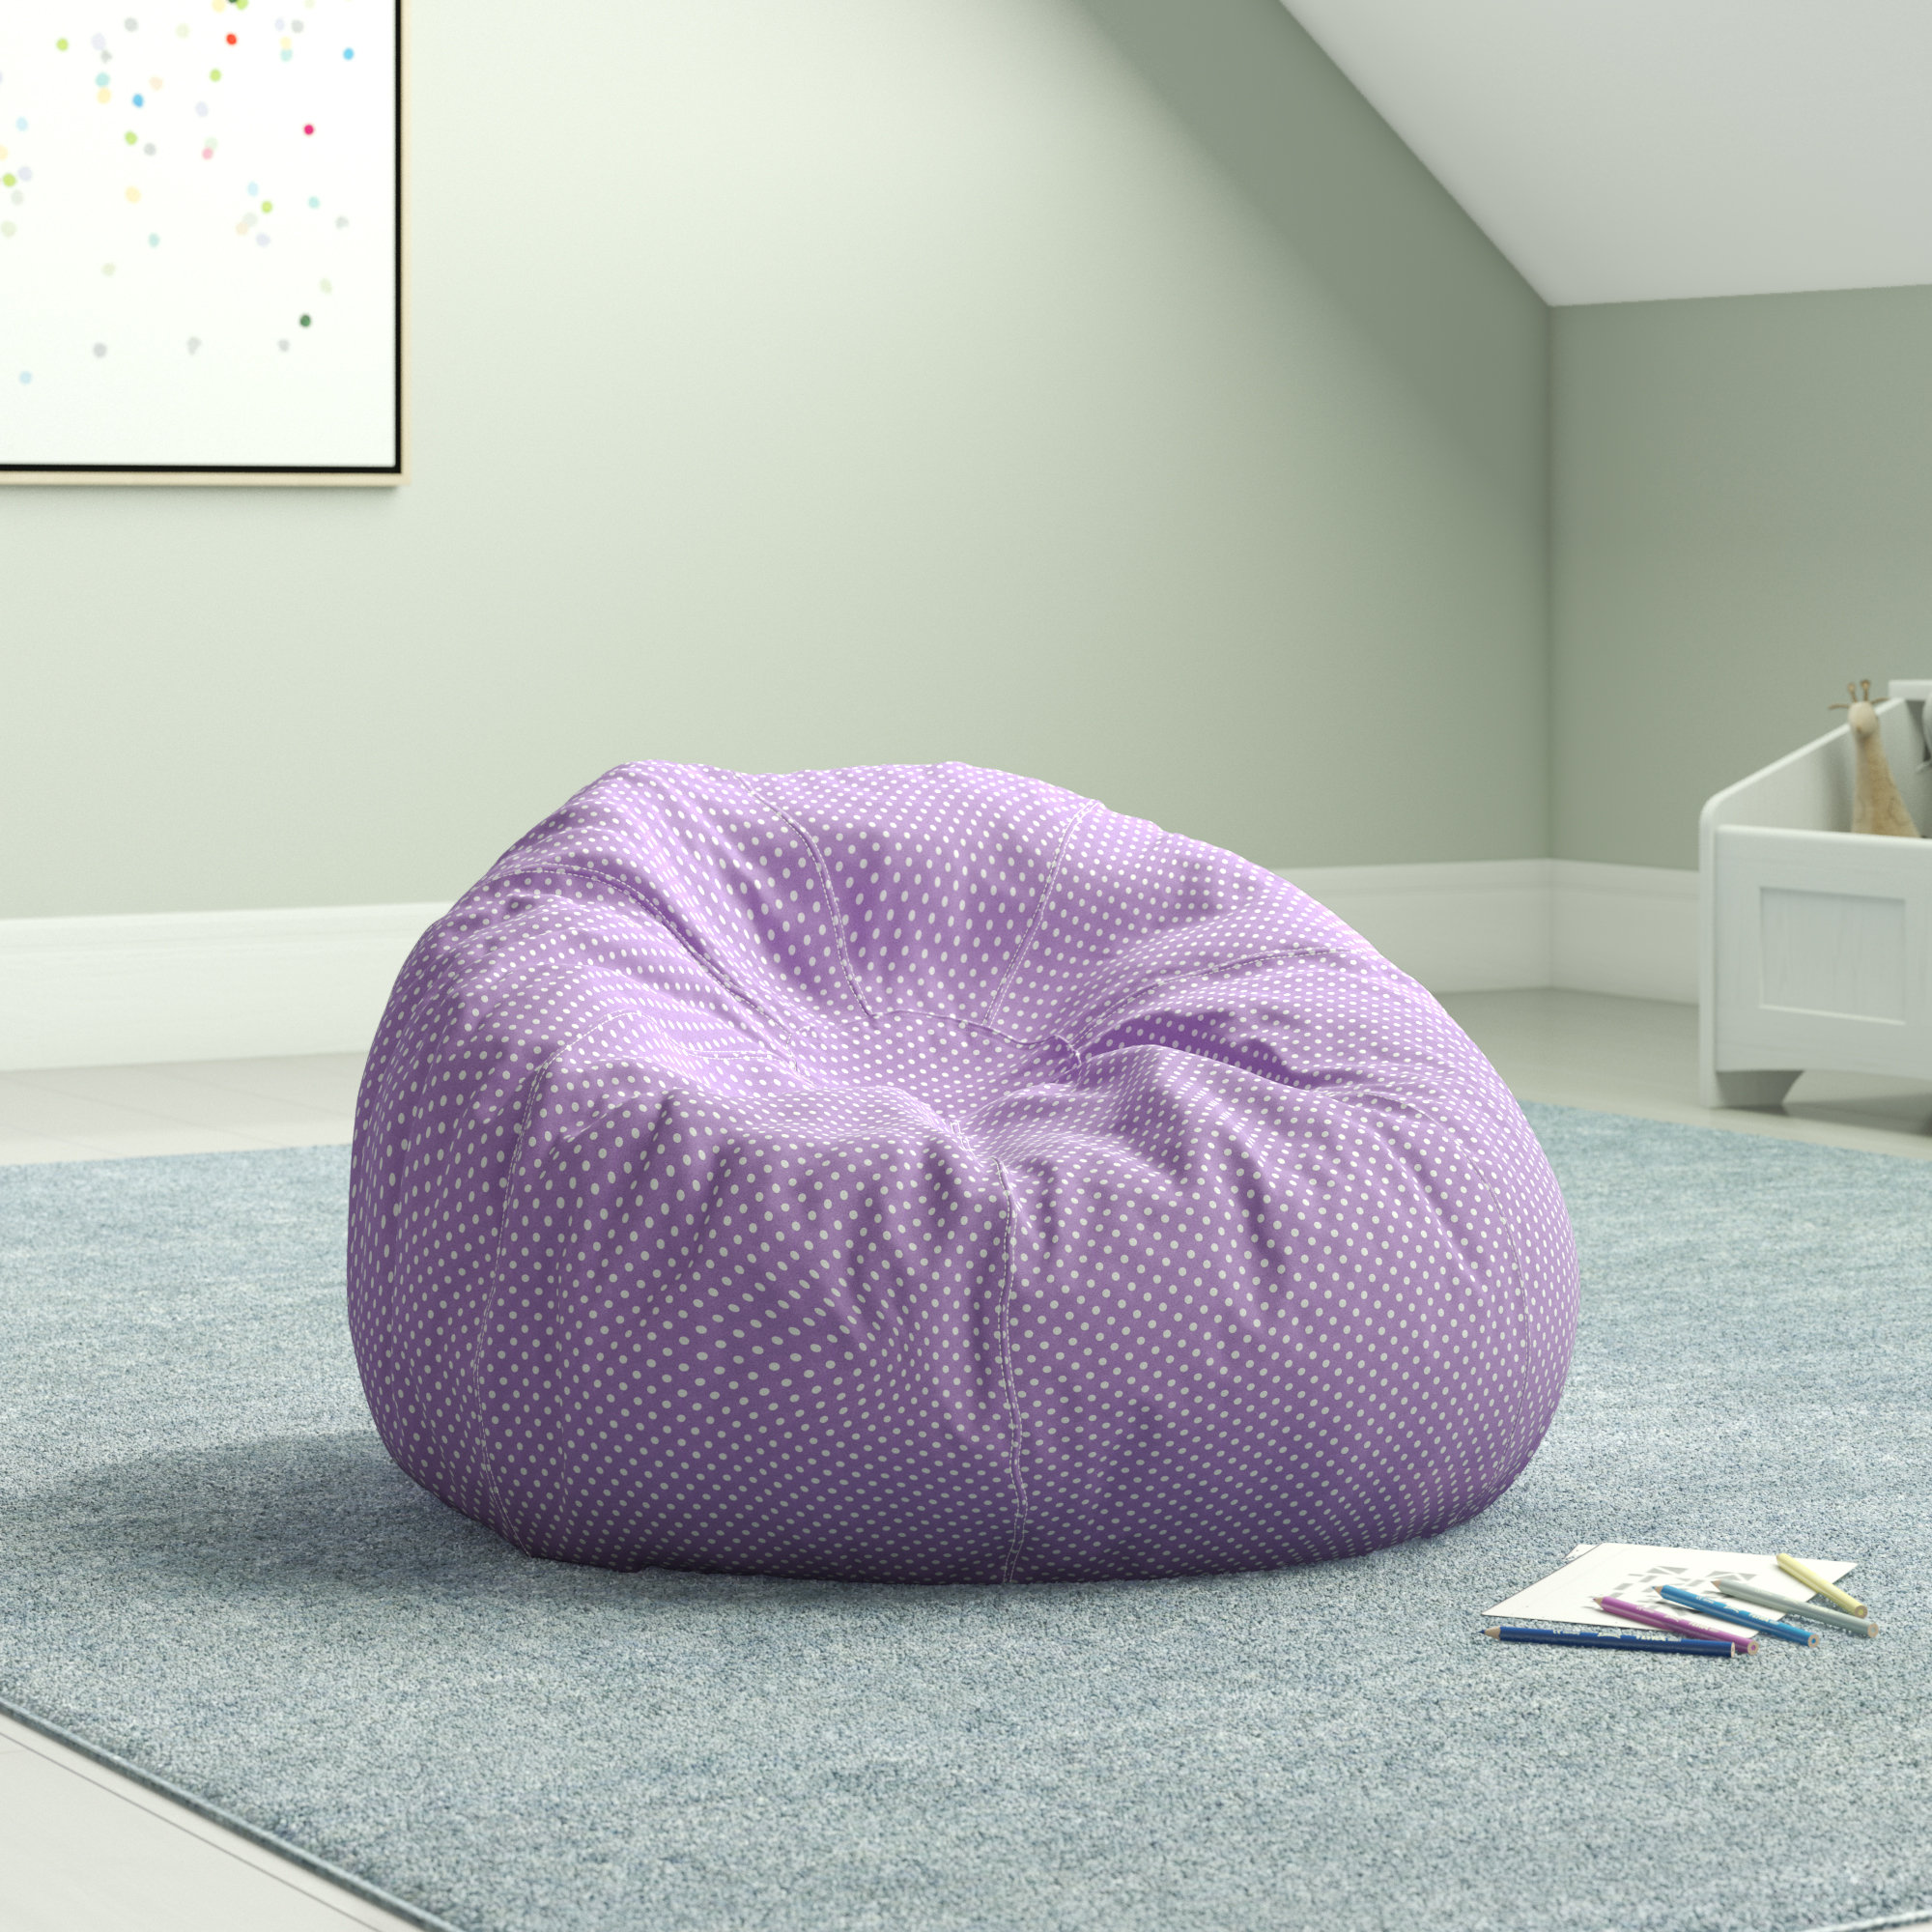 Classic Refillable Bean Bag Chair for Kids and Adults Mack & Milo Body Fabric: Lavender/White Cotton Twill, Size: Large